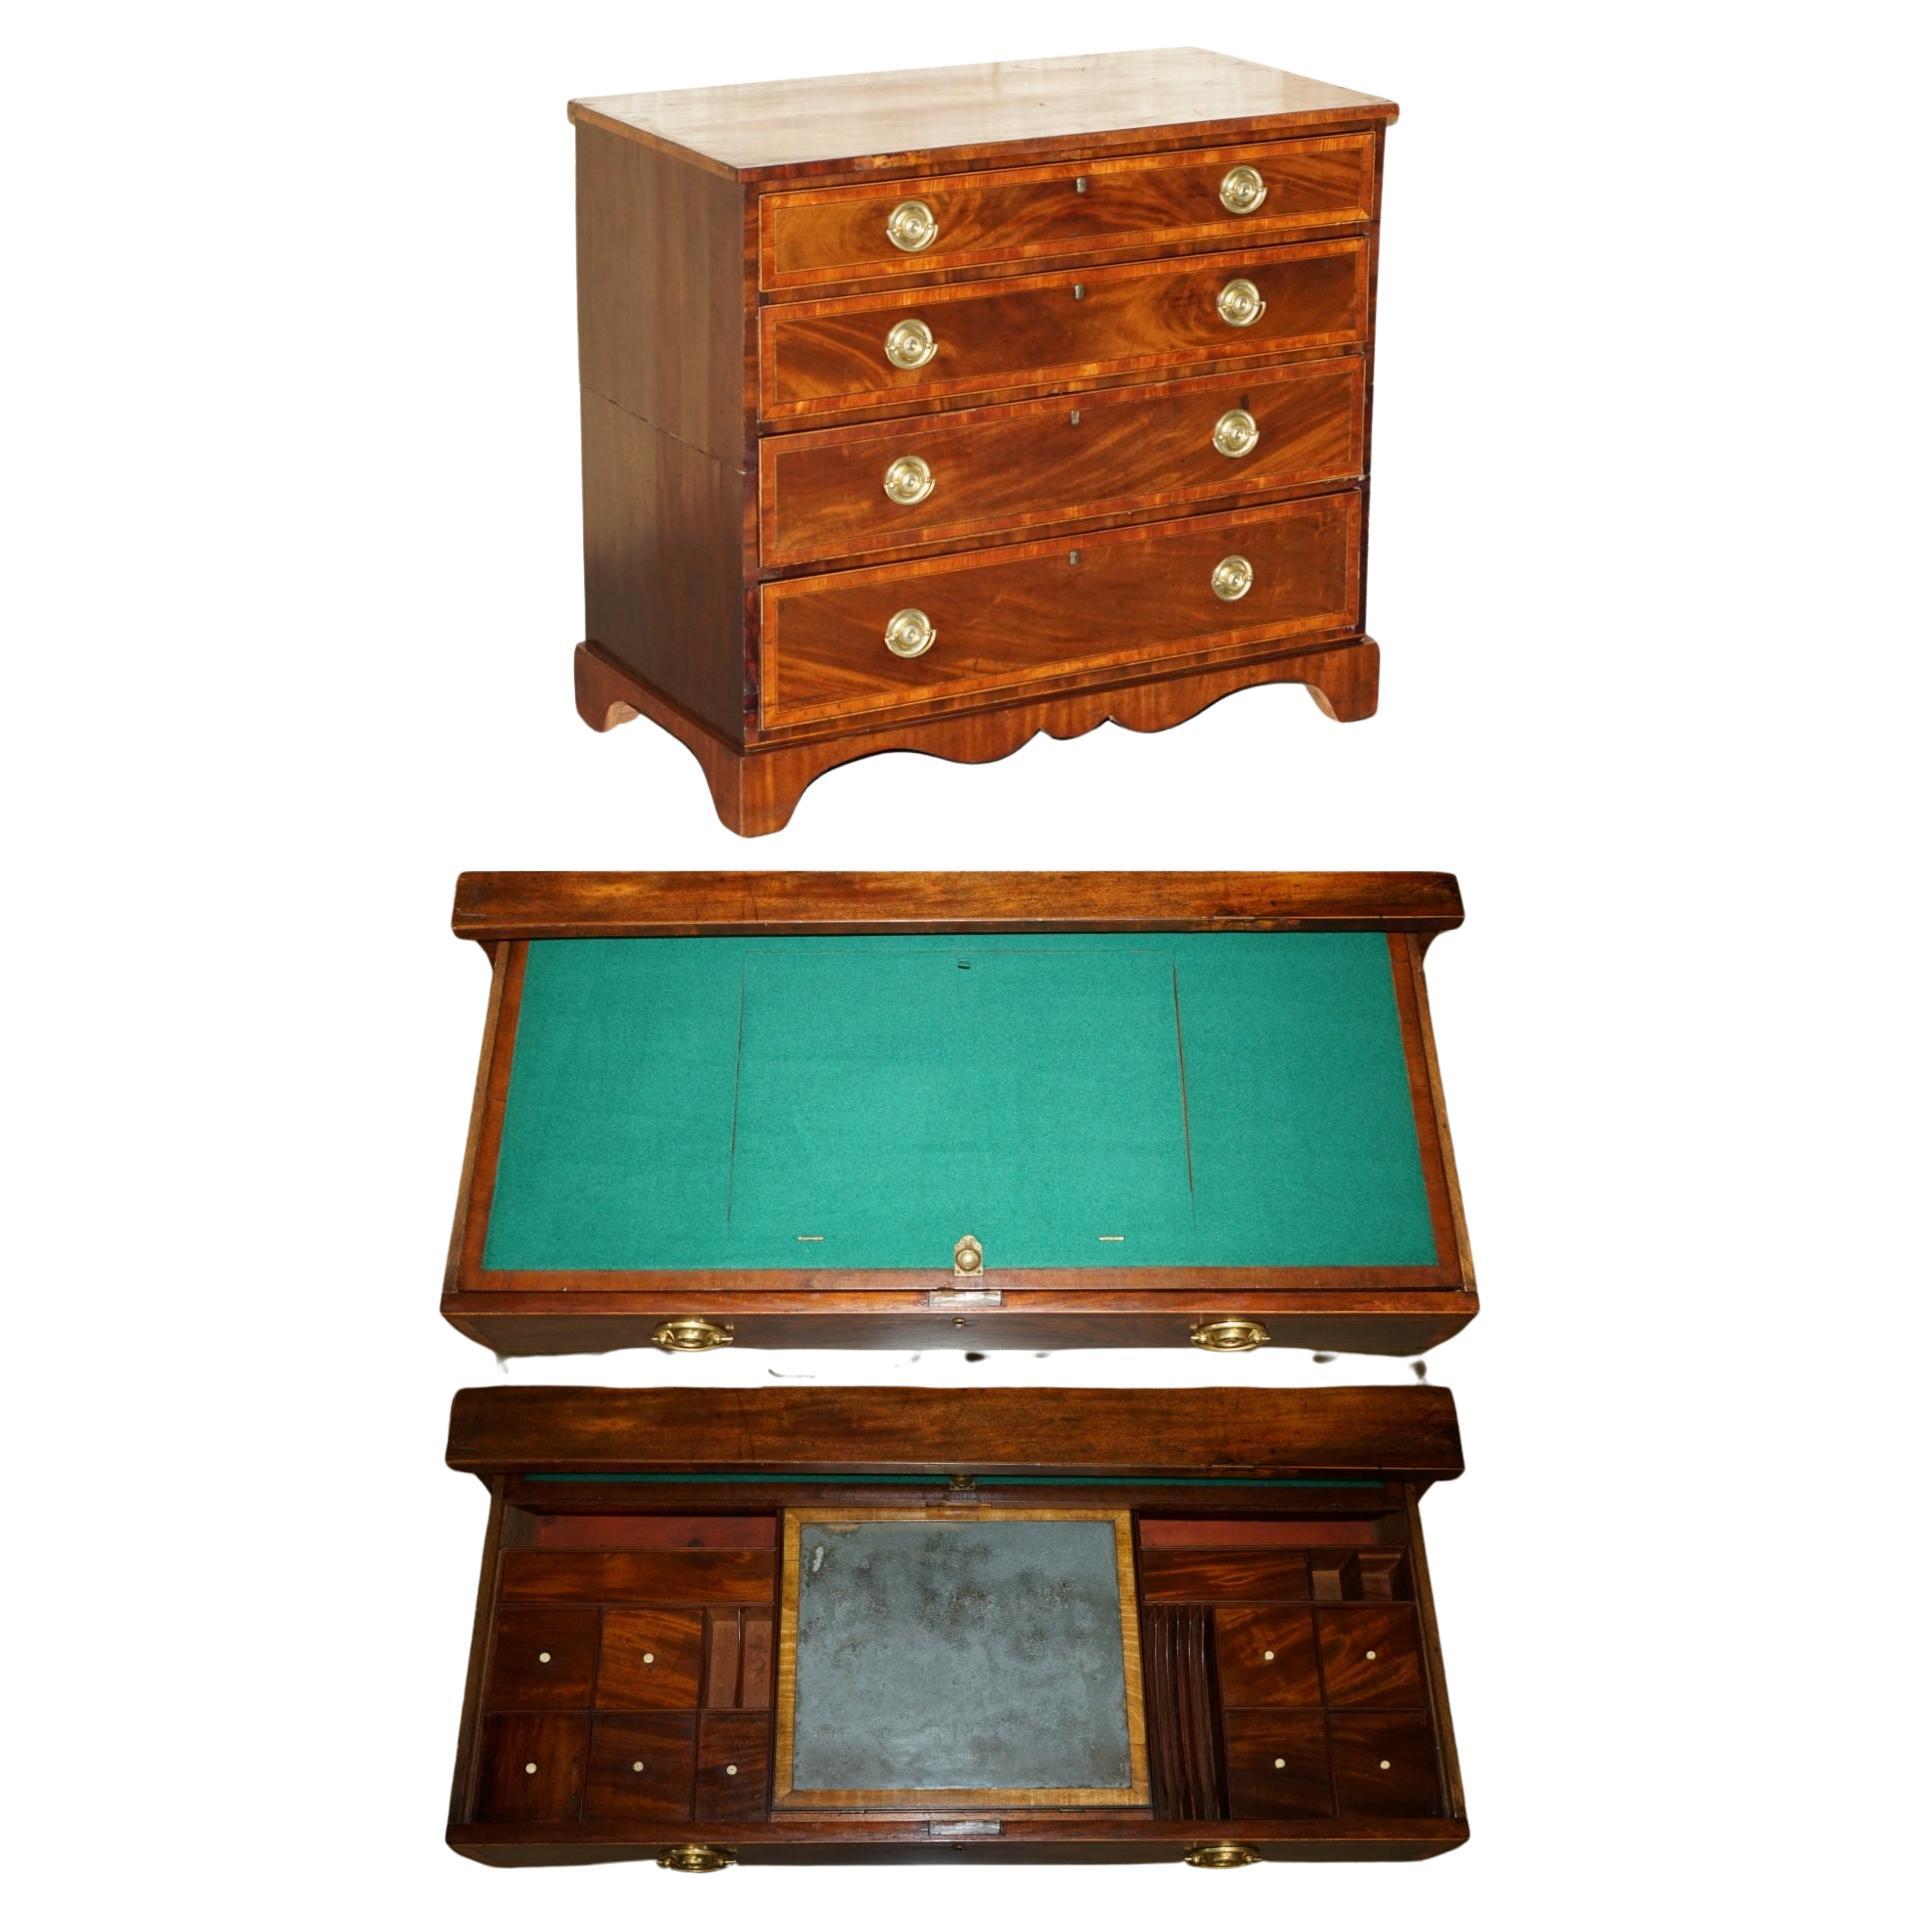 ANTiQUE GEORGE III BACHELORS CHEST OF DRAWERS ATTRIBUTED TO GILLOWS OF LANCASTER For Sale